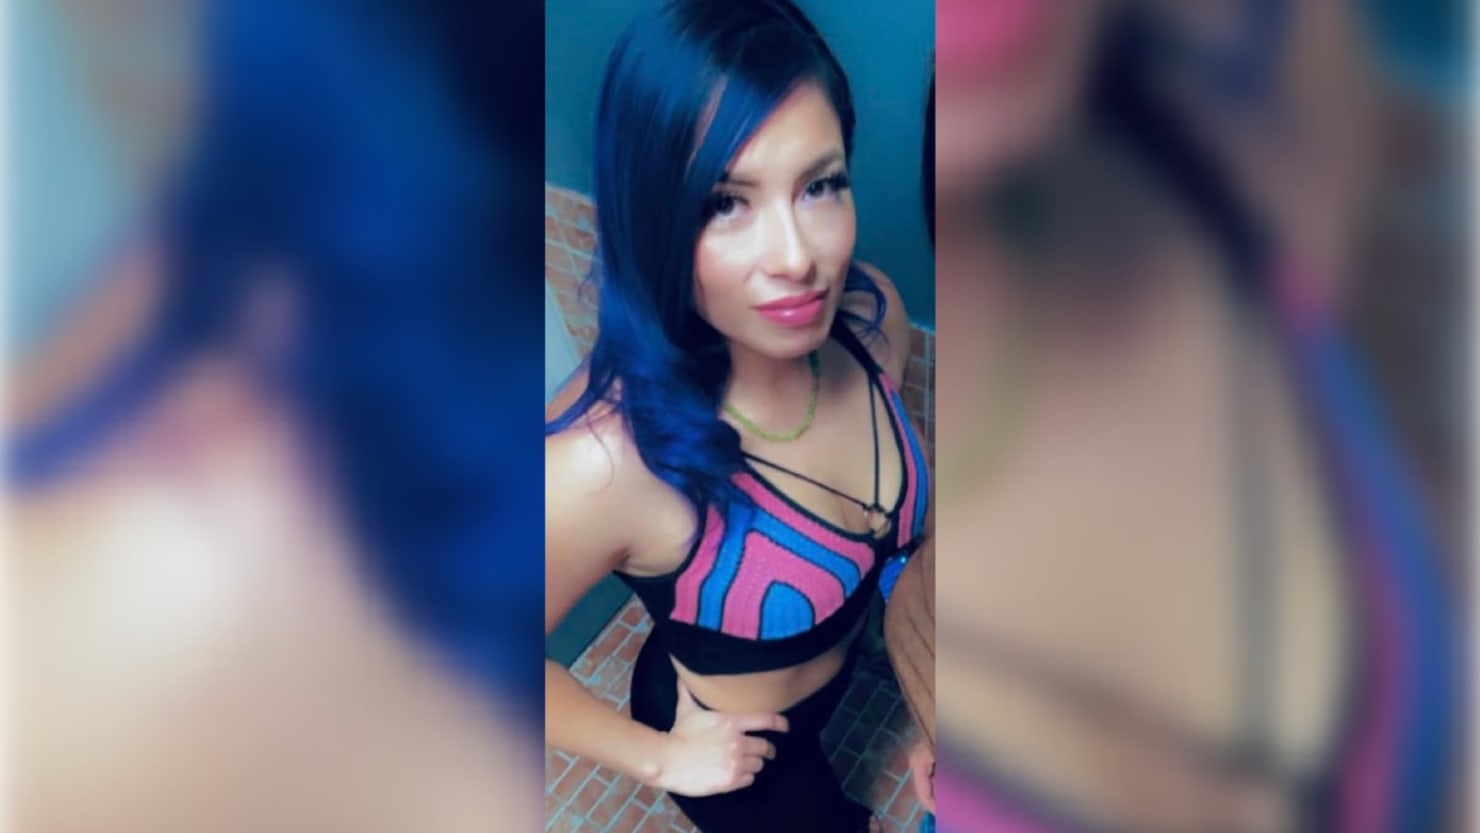 Female Wrestler Who Vanished After Texas UFC Event Found in Austin Cops